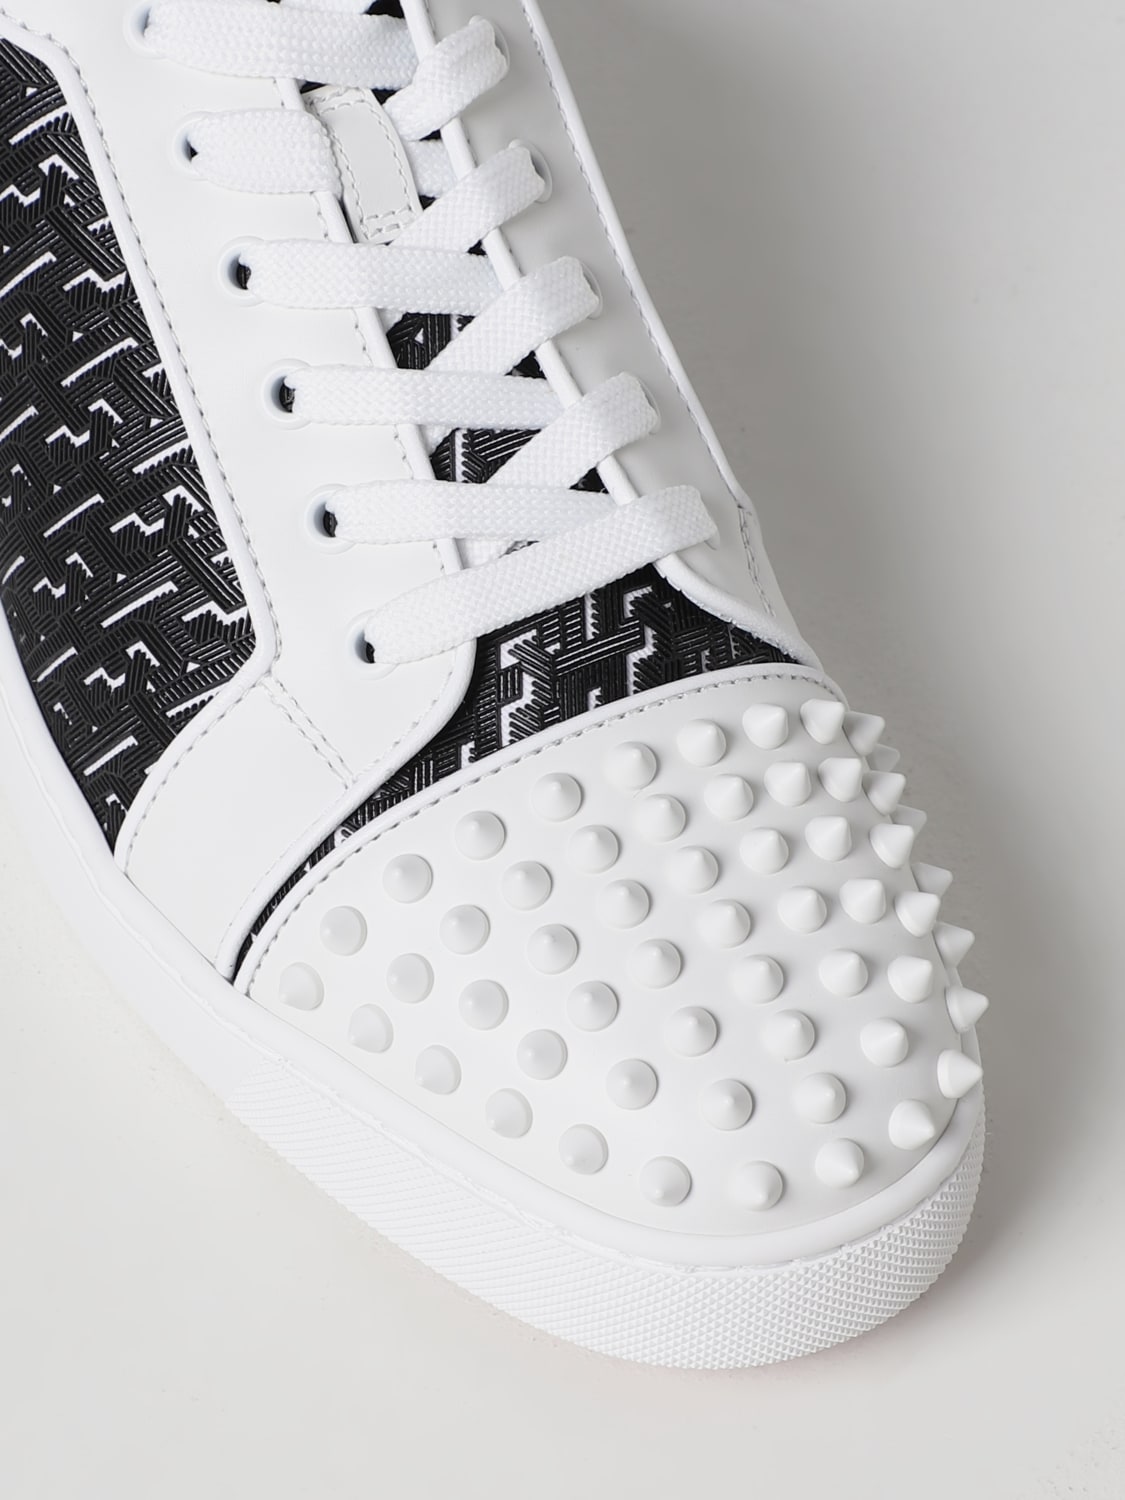 CHRISTIAN LOUBOUTIN: Louis Junior Spikes sneakers in leather with